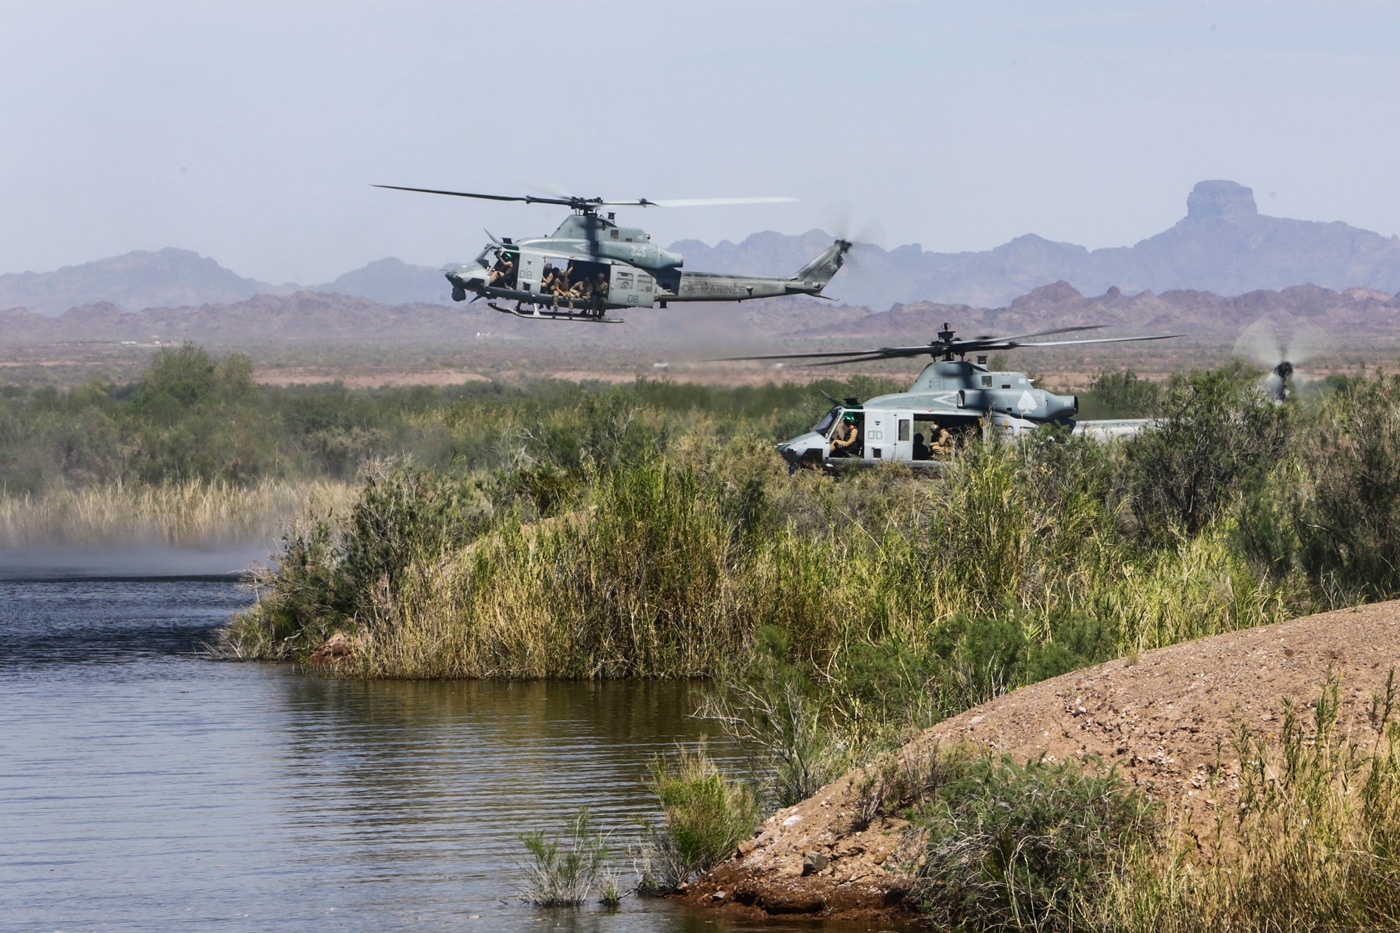 UH-1Y Huey's assigned to Marine Aviation Weapons and Tactics Squadron One (MAWTS-1) prepares to land during a helocast exercise at Ferguson Lake near Yuma, Ariz., April 3, 2015. The exercise is part of a seven-week training event hosted by MAWTS-1 cadre. MAWTS-1 provides standardized tactical training and certification of unit instructor qualifications to support Marine Aviation Training and Readiness and assists in developing and employing aviation weapons and tactics. (U.S. Marine Corps photograph by Staff Sgt. Artur Shvartsberg, MAWTS-1 COMCAM/Released)